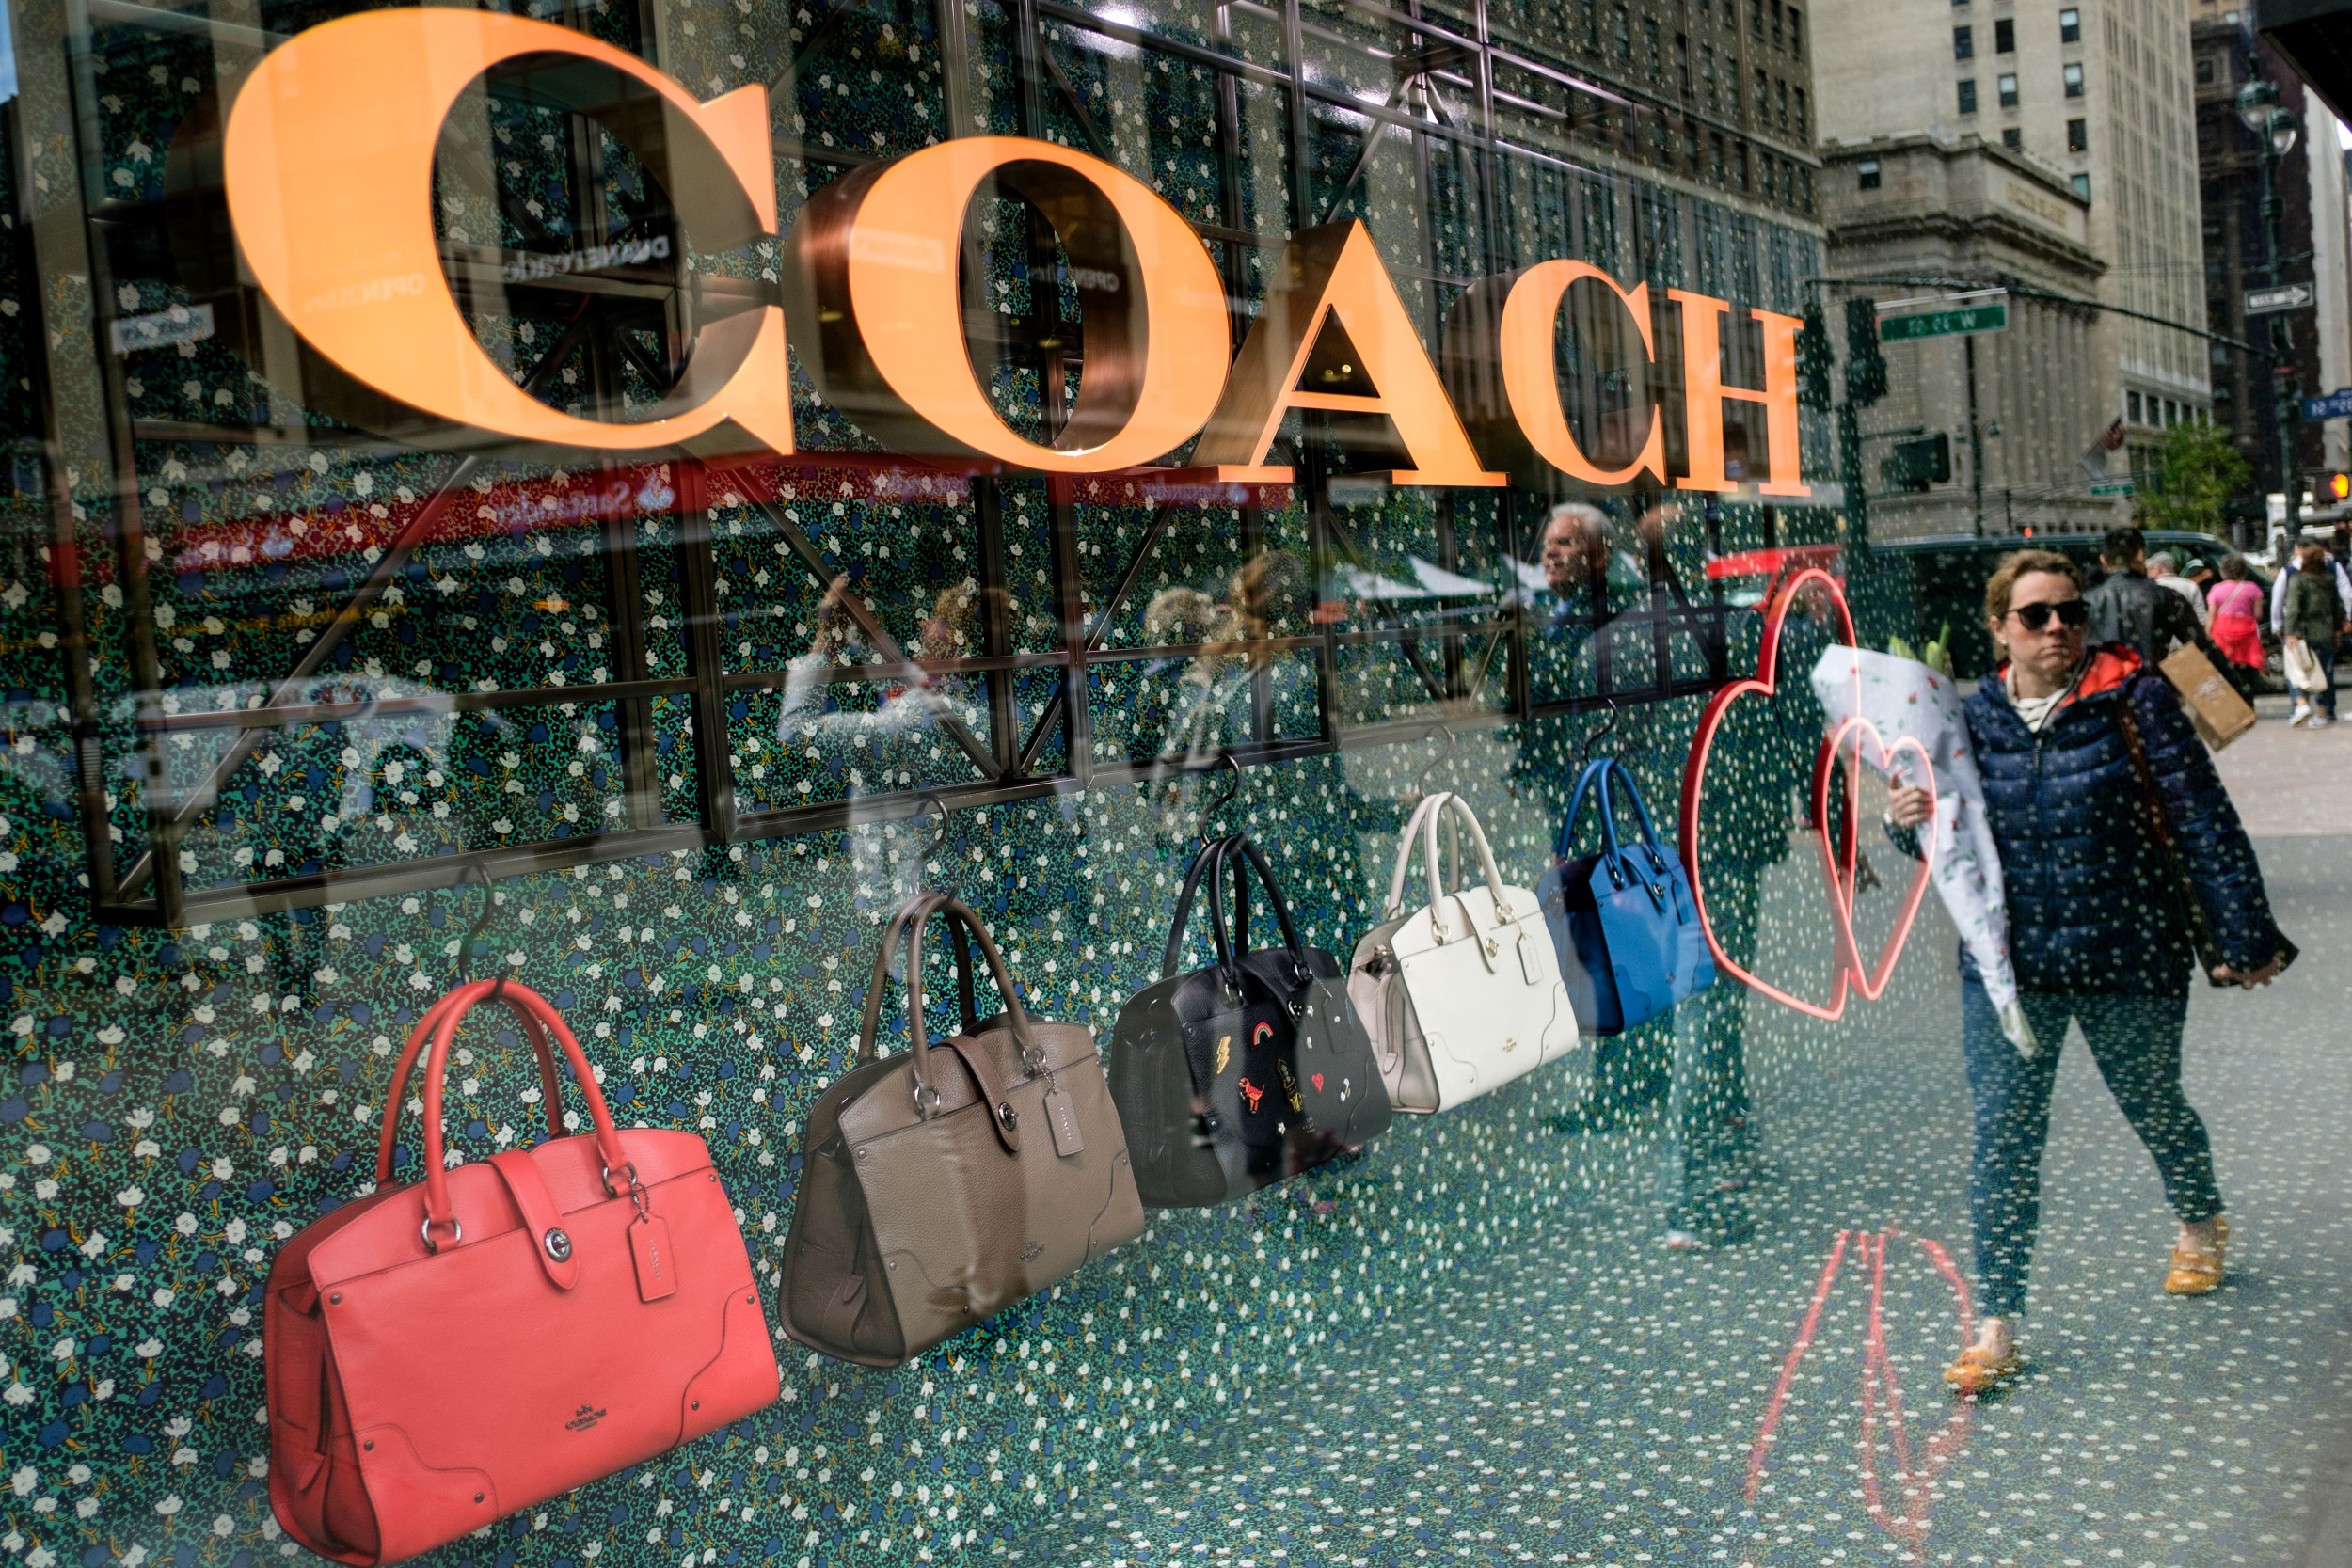 8 Coach Outlet bags on sale that would make a great Mother's Day gift